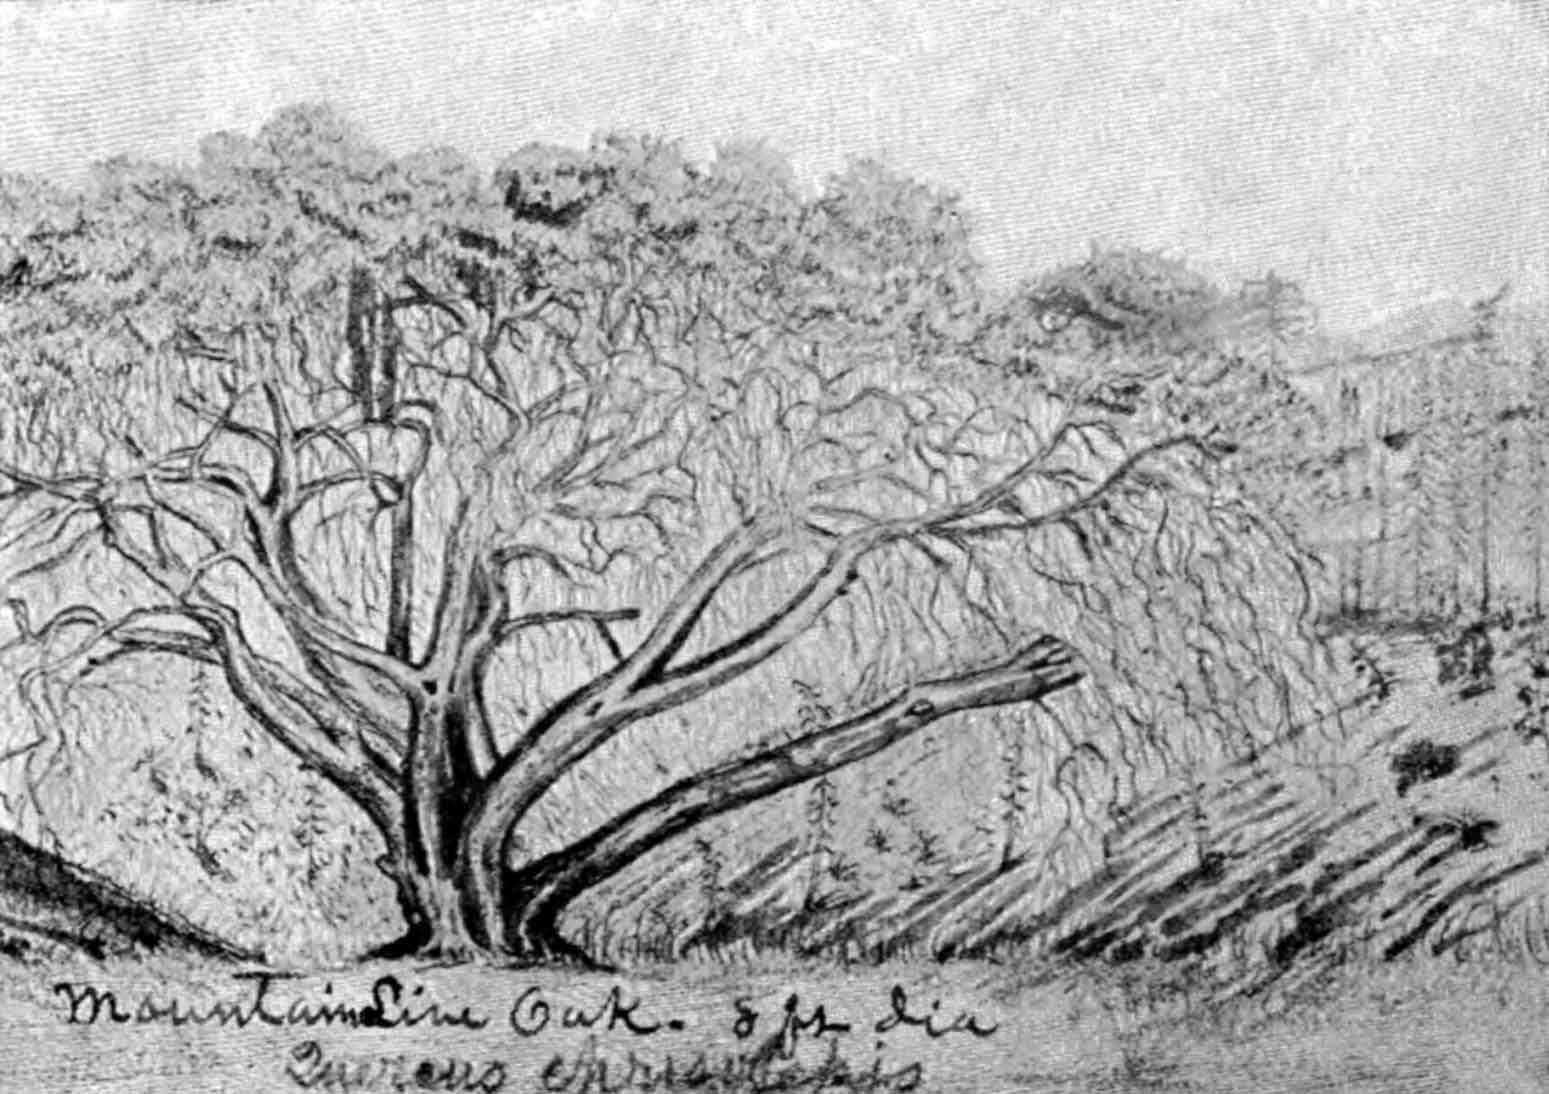 A drawing of a mountain live oak with a thick trunk and broad branches that stretch out to form a wide, open canopy.